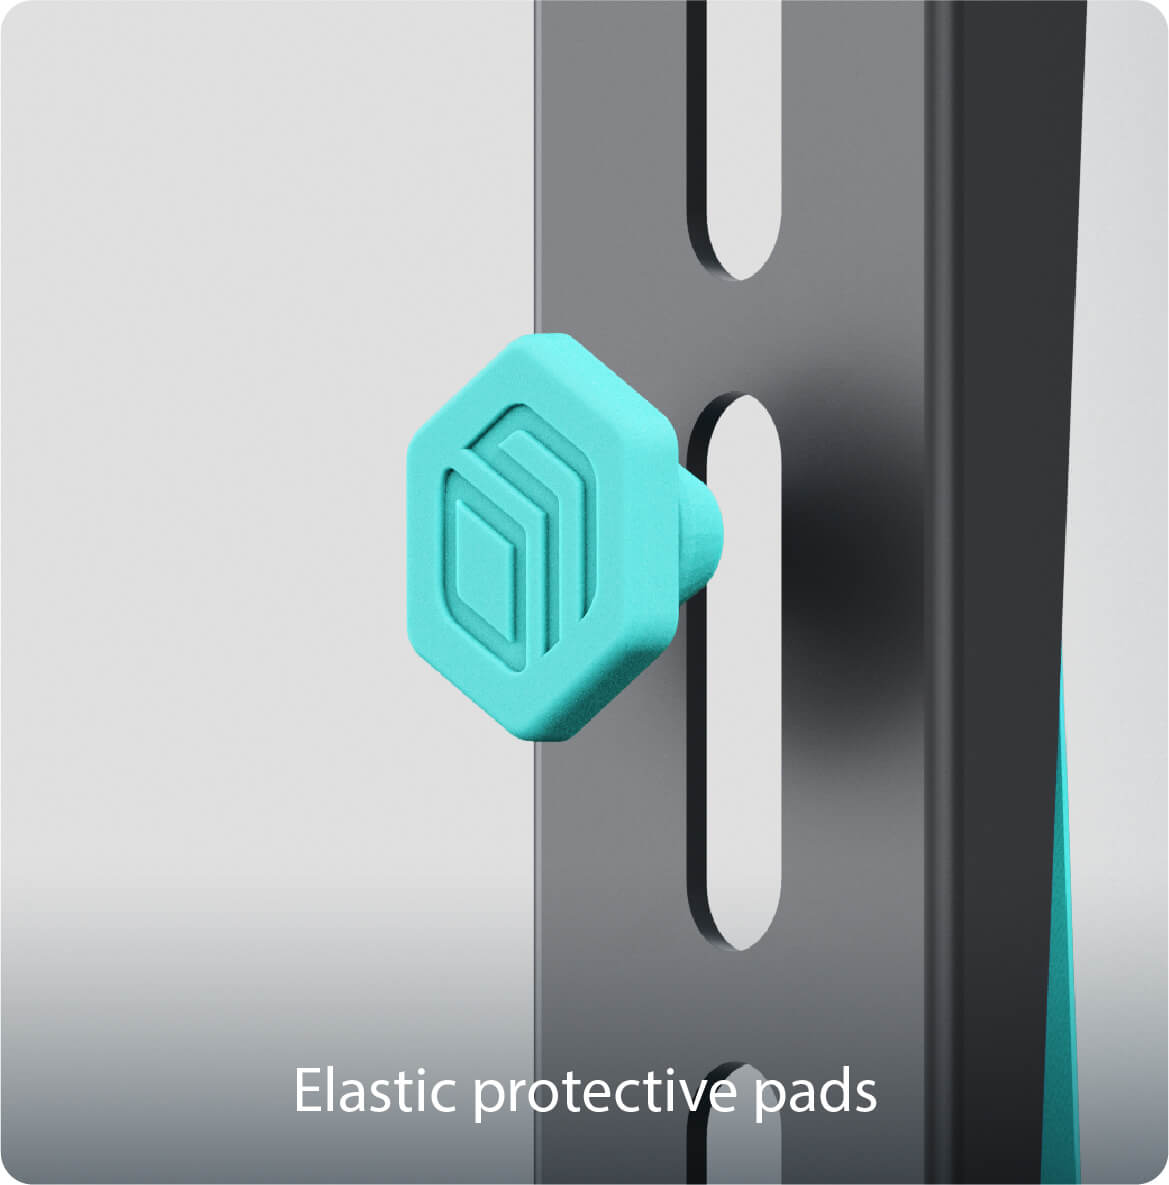 Elastic protective pads